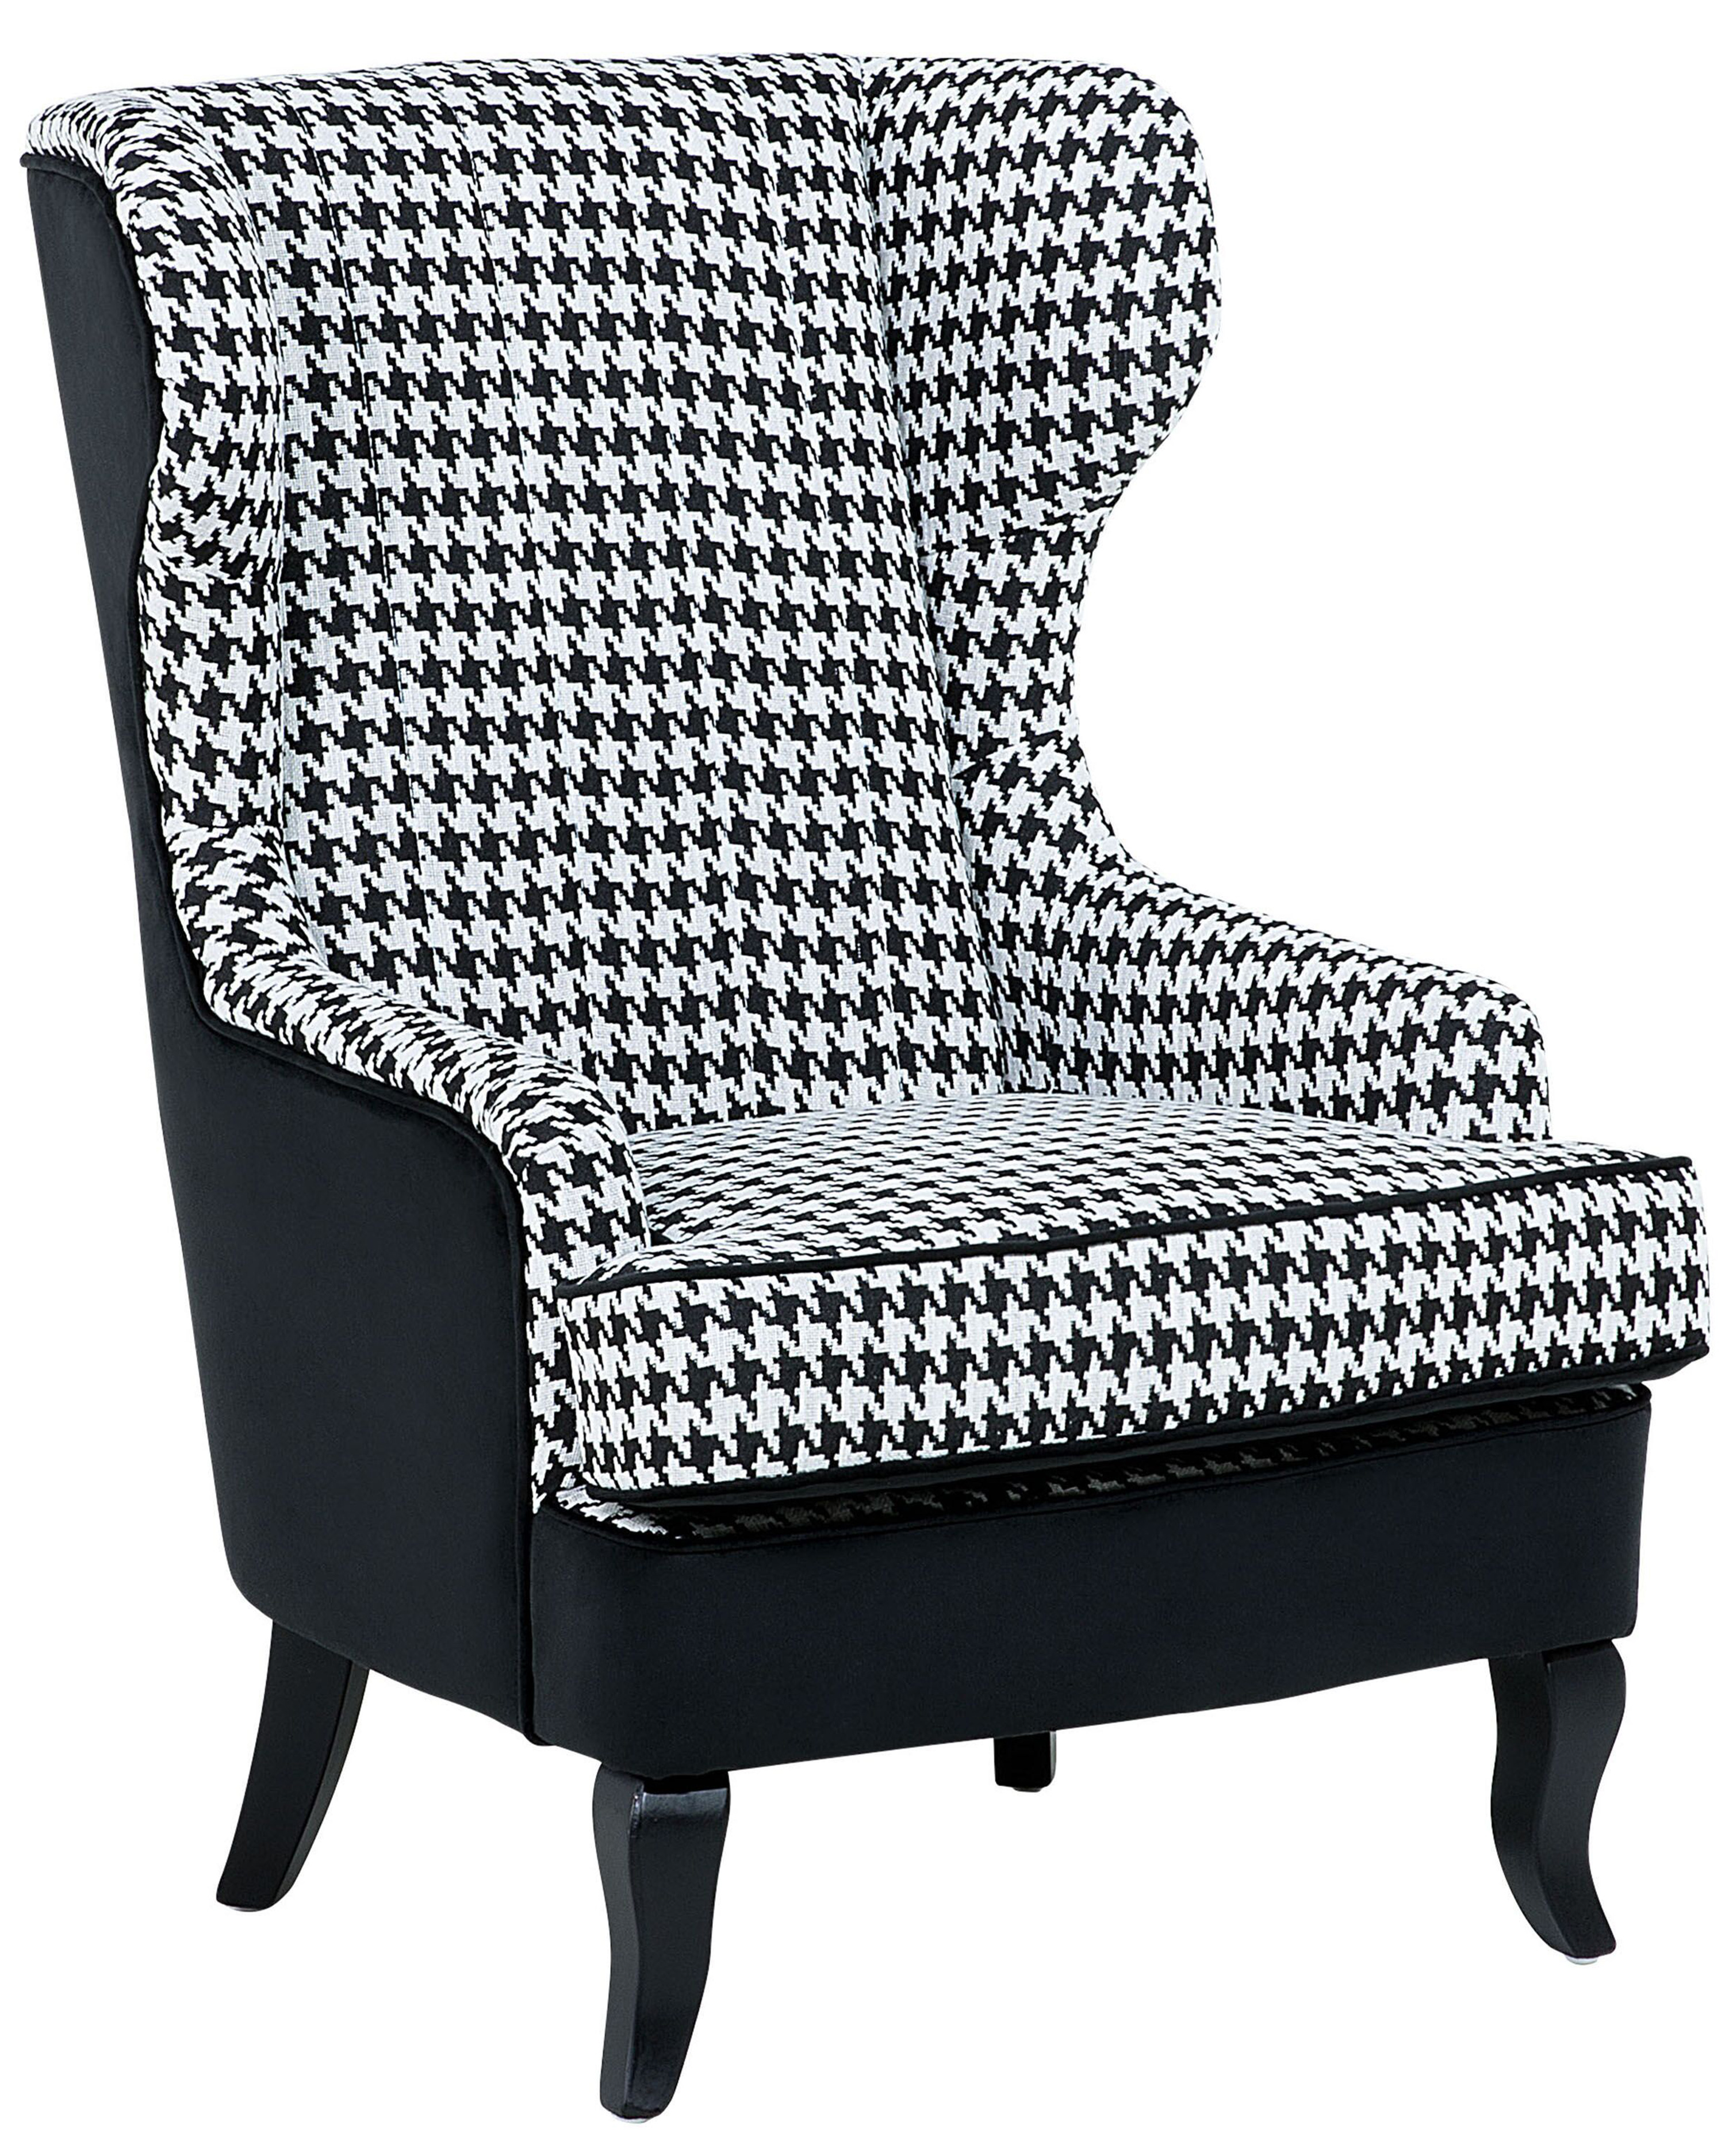 Fabric Armchair Houndstooth Black and White MOLDE_673415